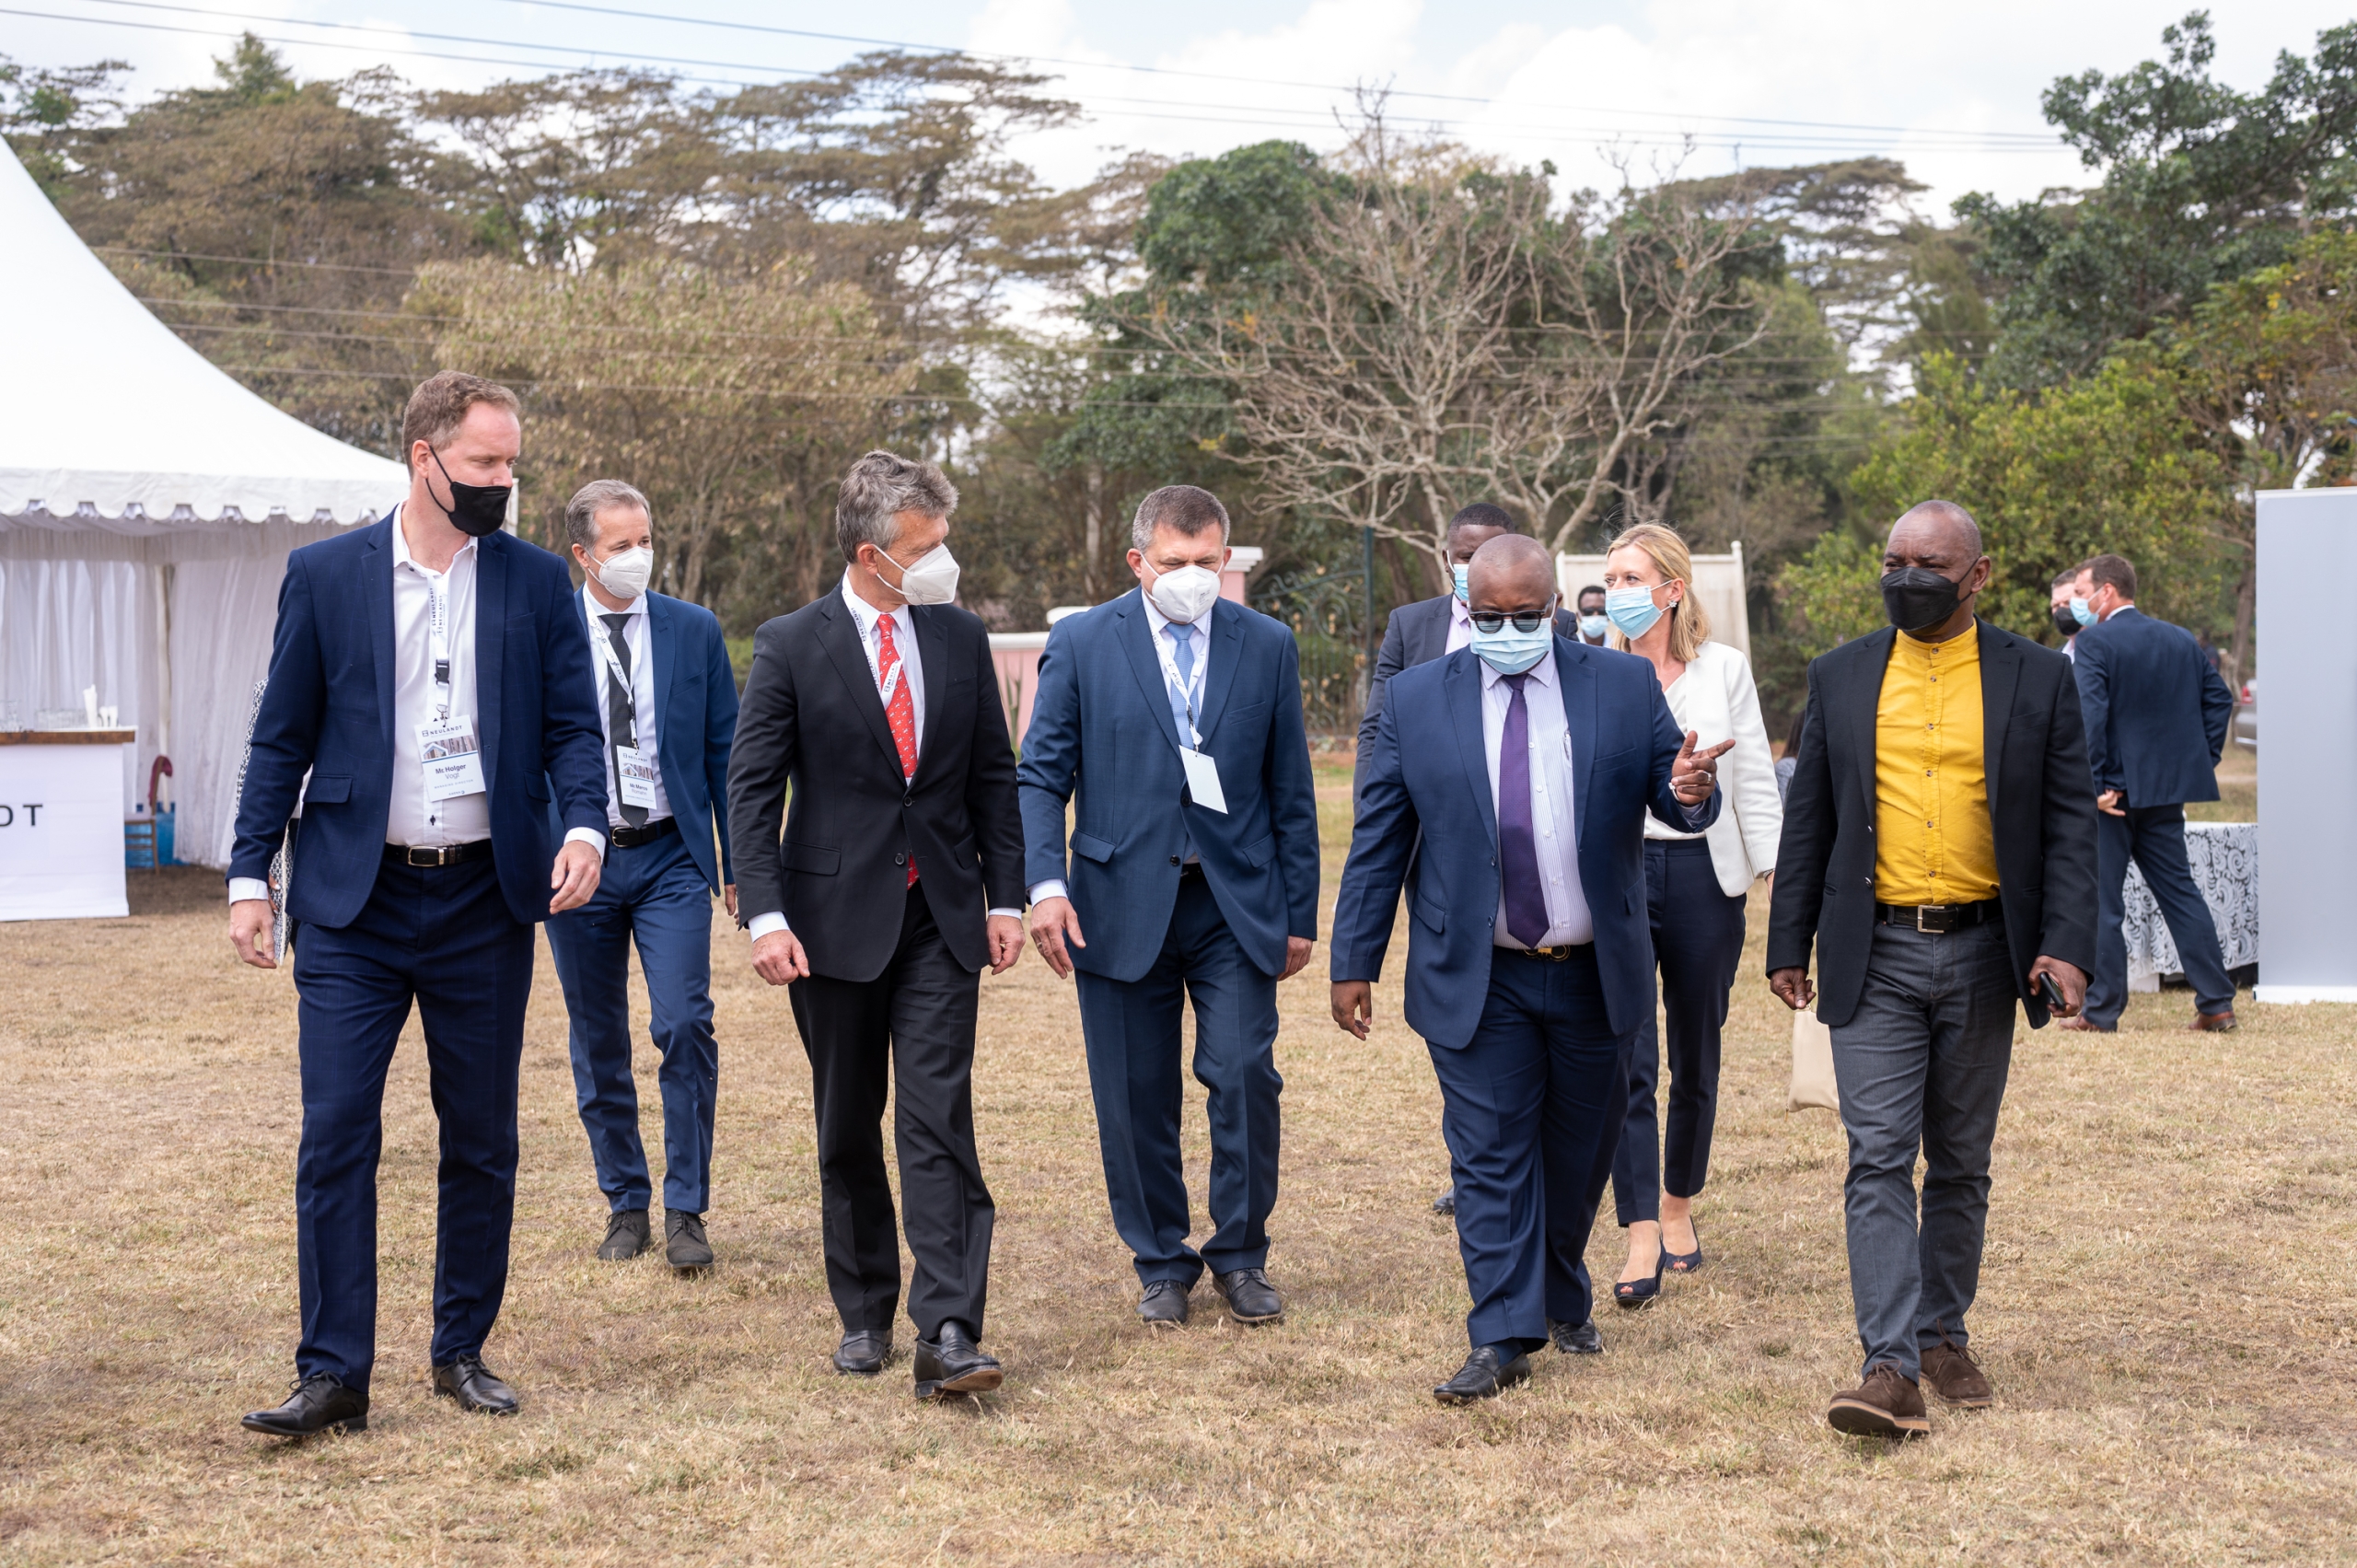 Crowd of business people including NEULANDT Managing Director Marco Romahn are walking on the NCA show ground in Kenia